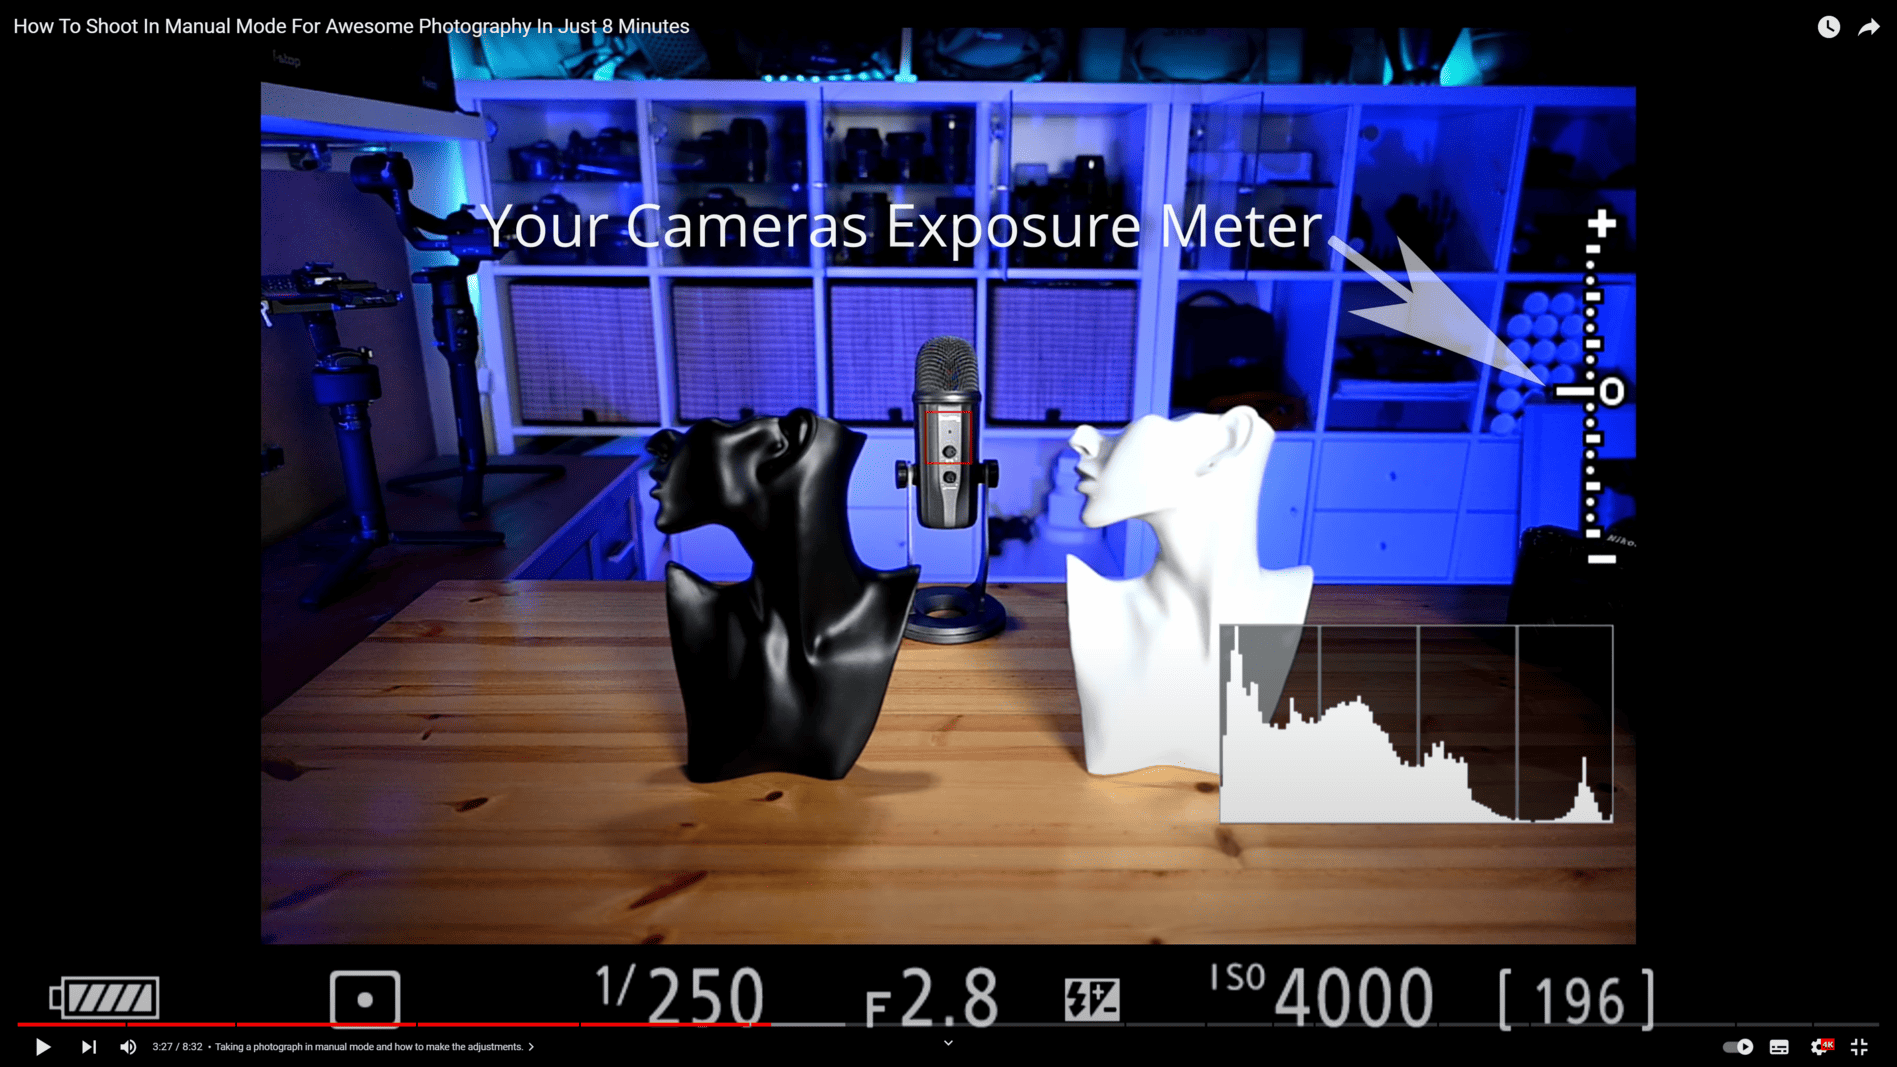 How to shoot in manual mode demo